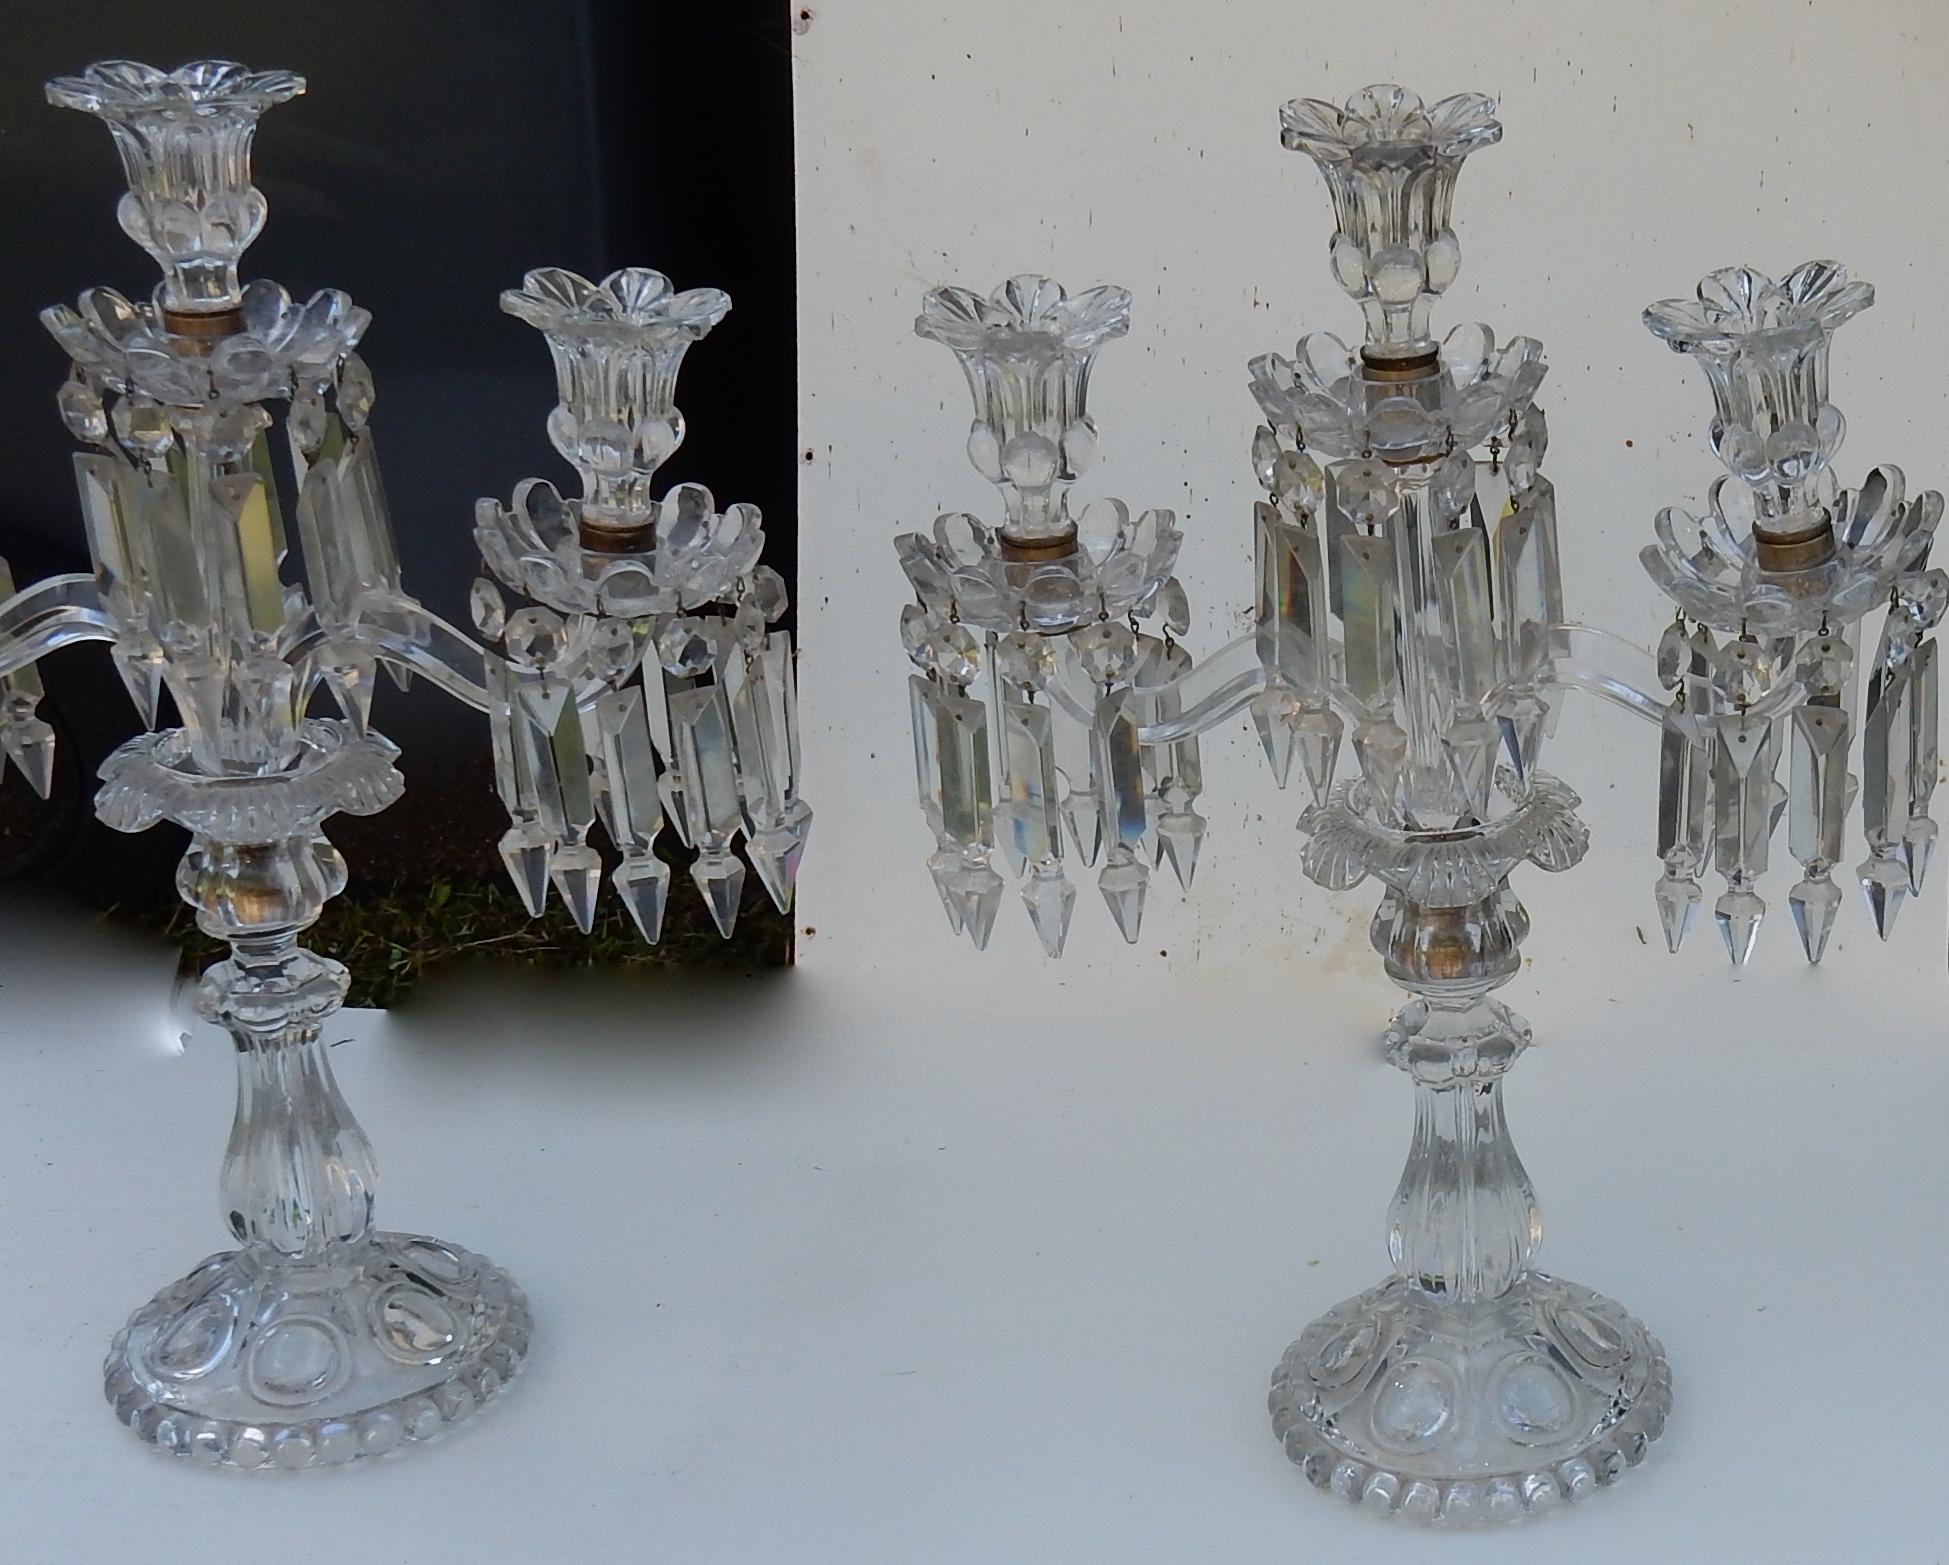 French 1950 Pair of Baccarat Crystal Chandeliers with 2 Arms and Signed Baccarat